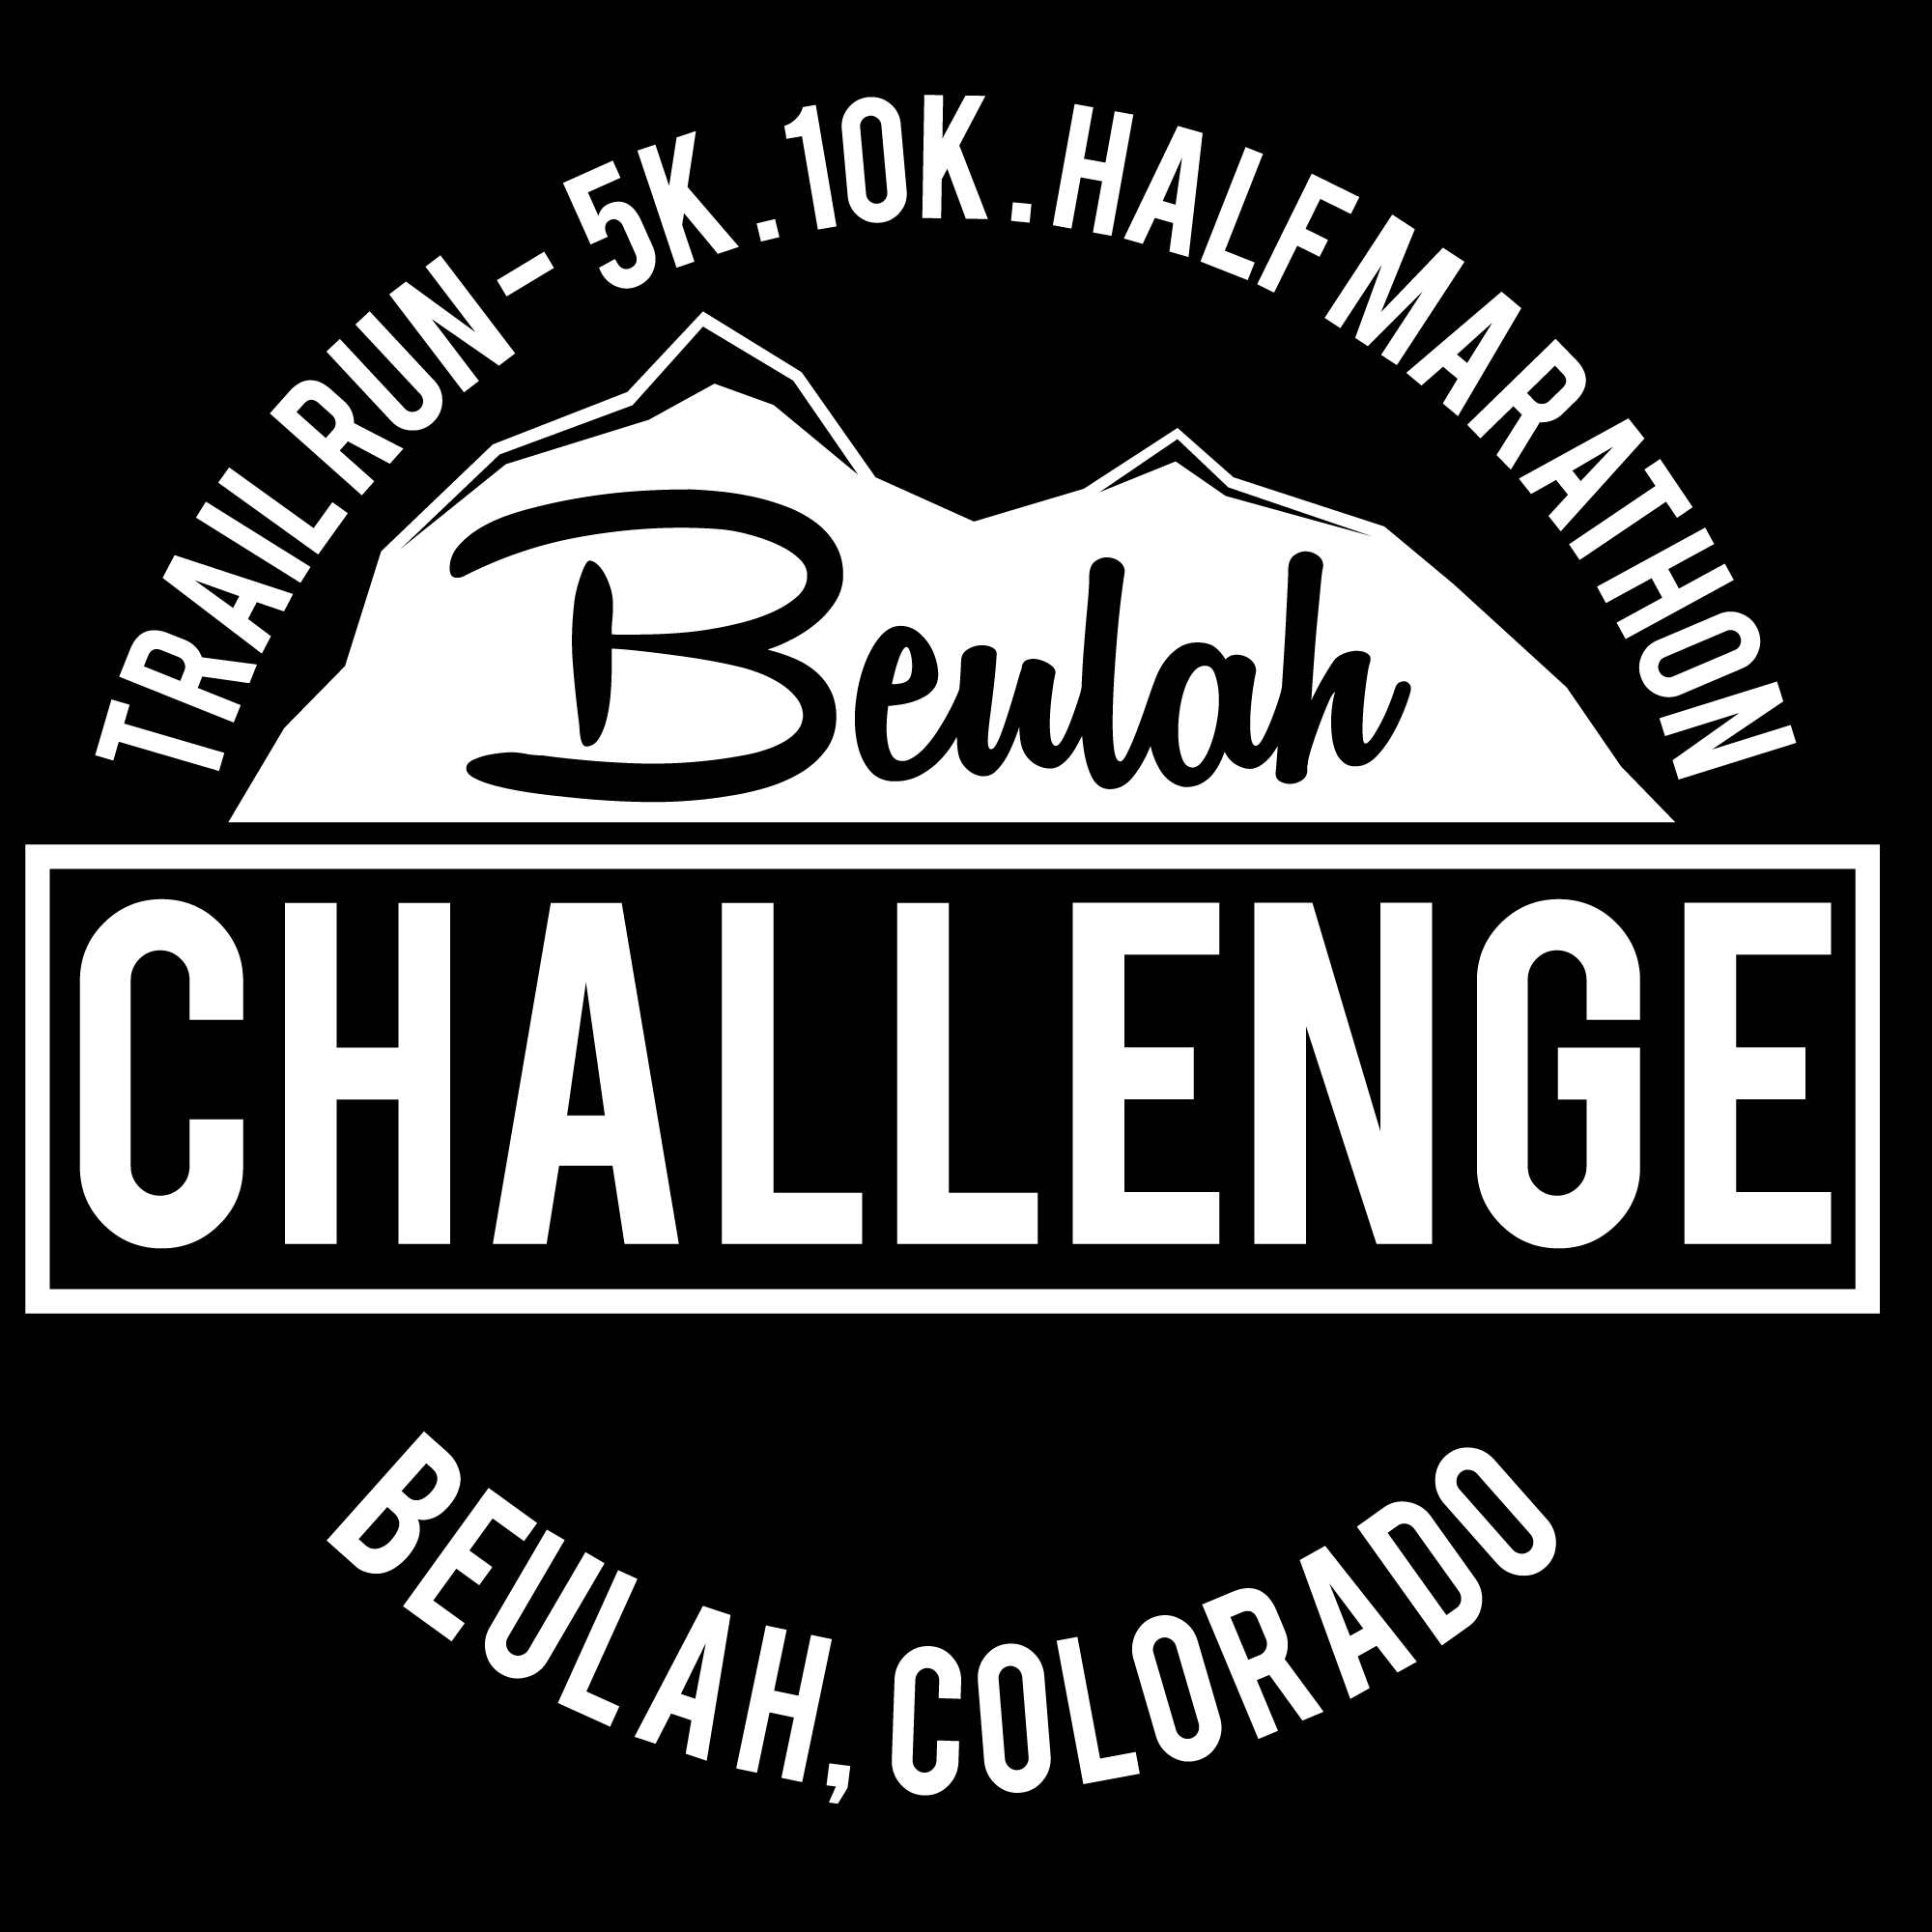 Beulah-Challenge-logo-no-date-white-on-black.png